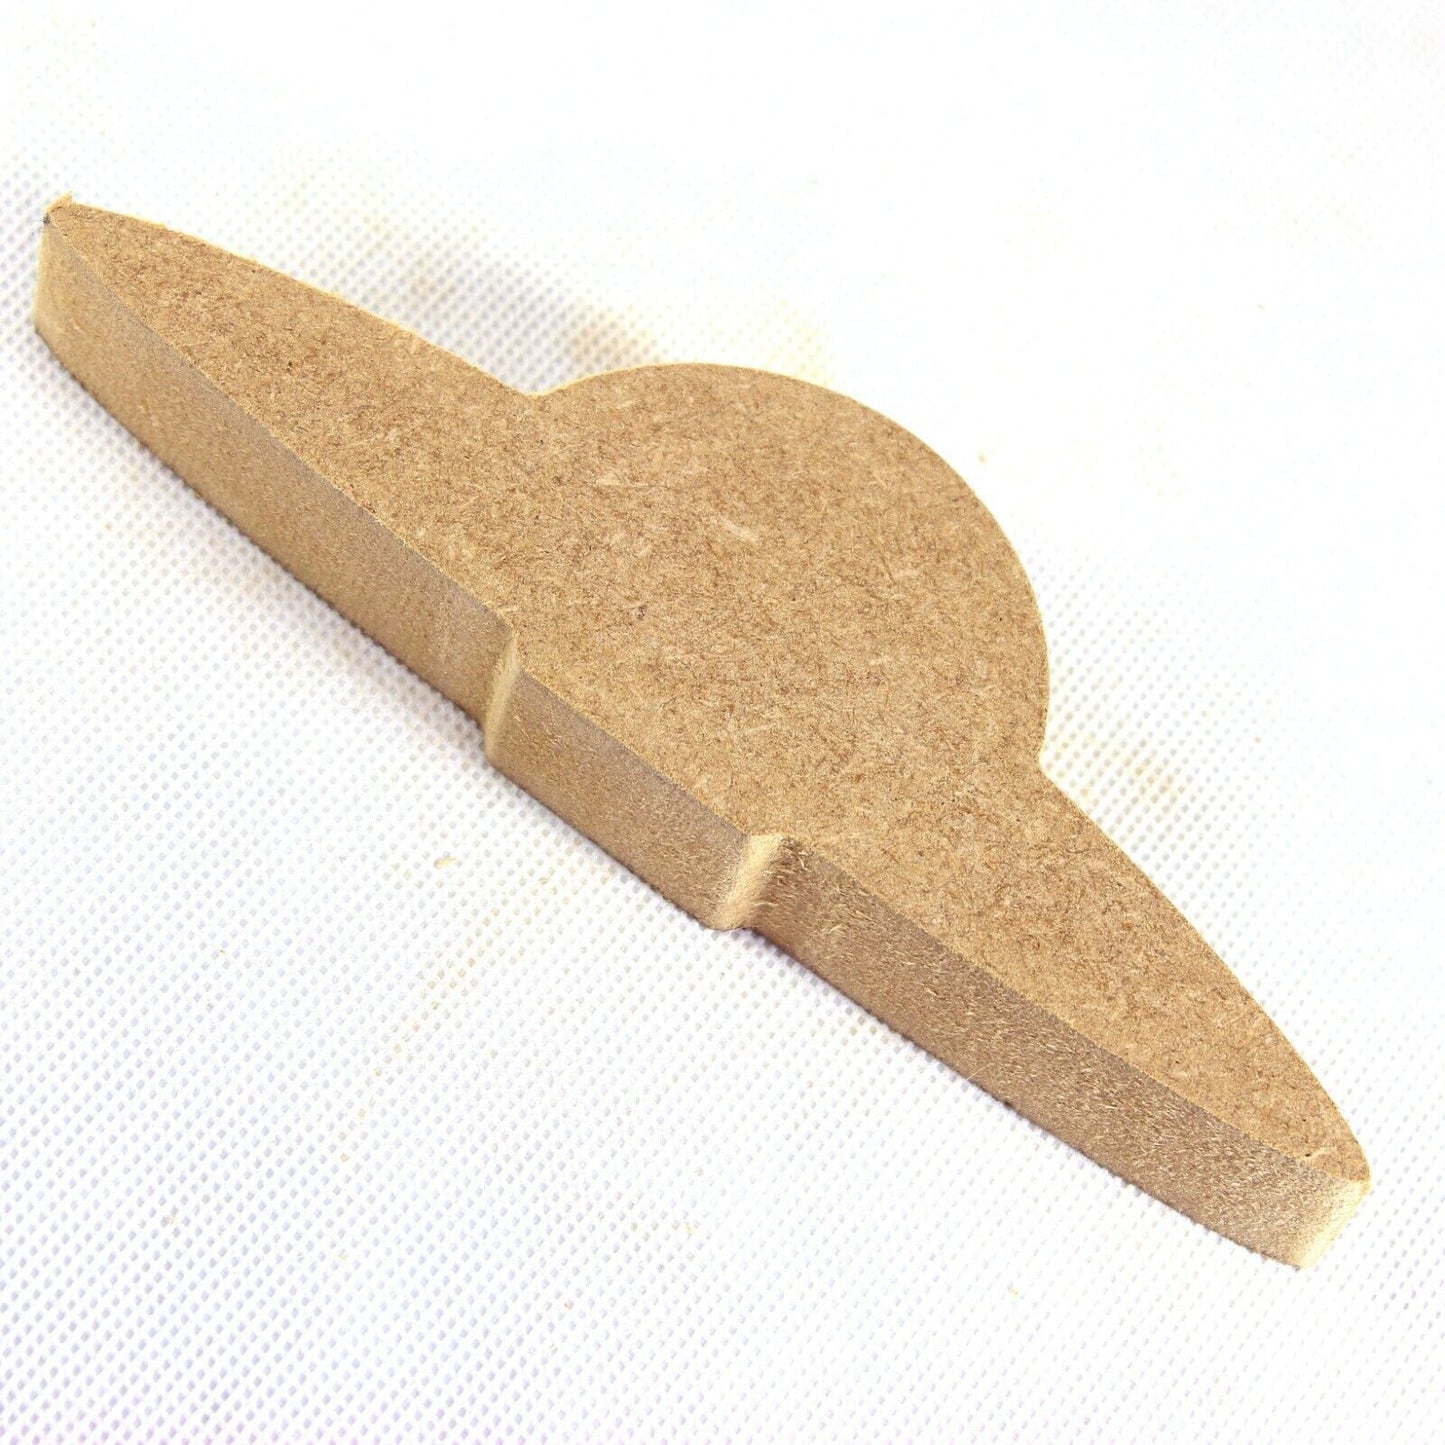 Free Standing 18mm MDF Flying Saucer Craft Shape Various Sizes. UFO, Sci fi